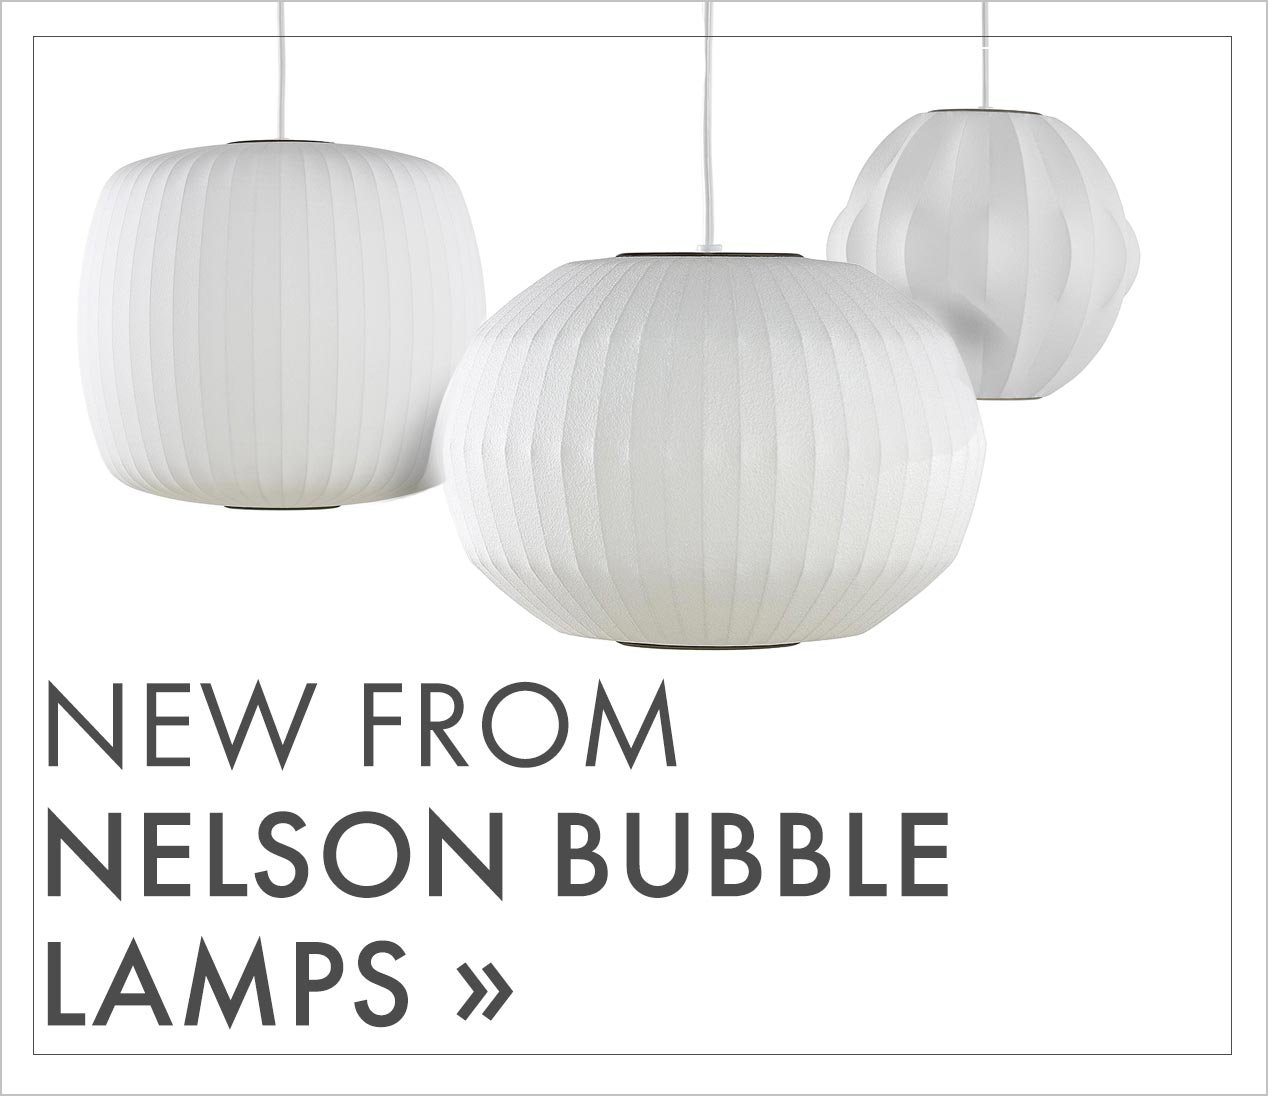 New from Nelson Bubble Lamps